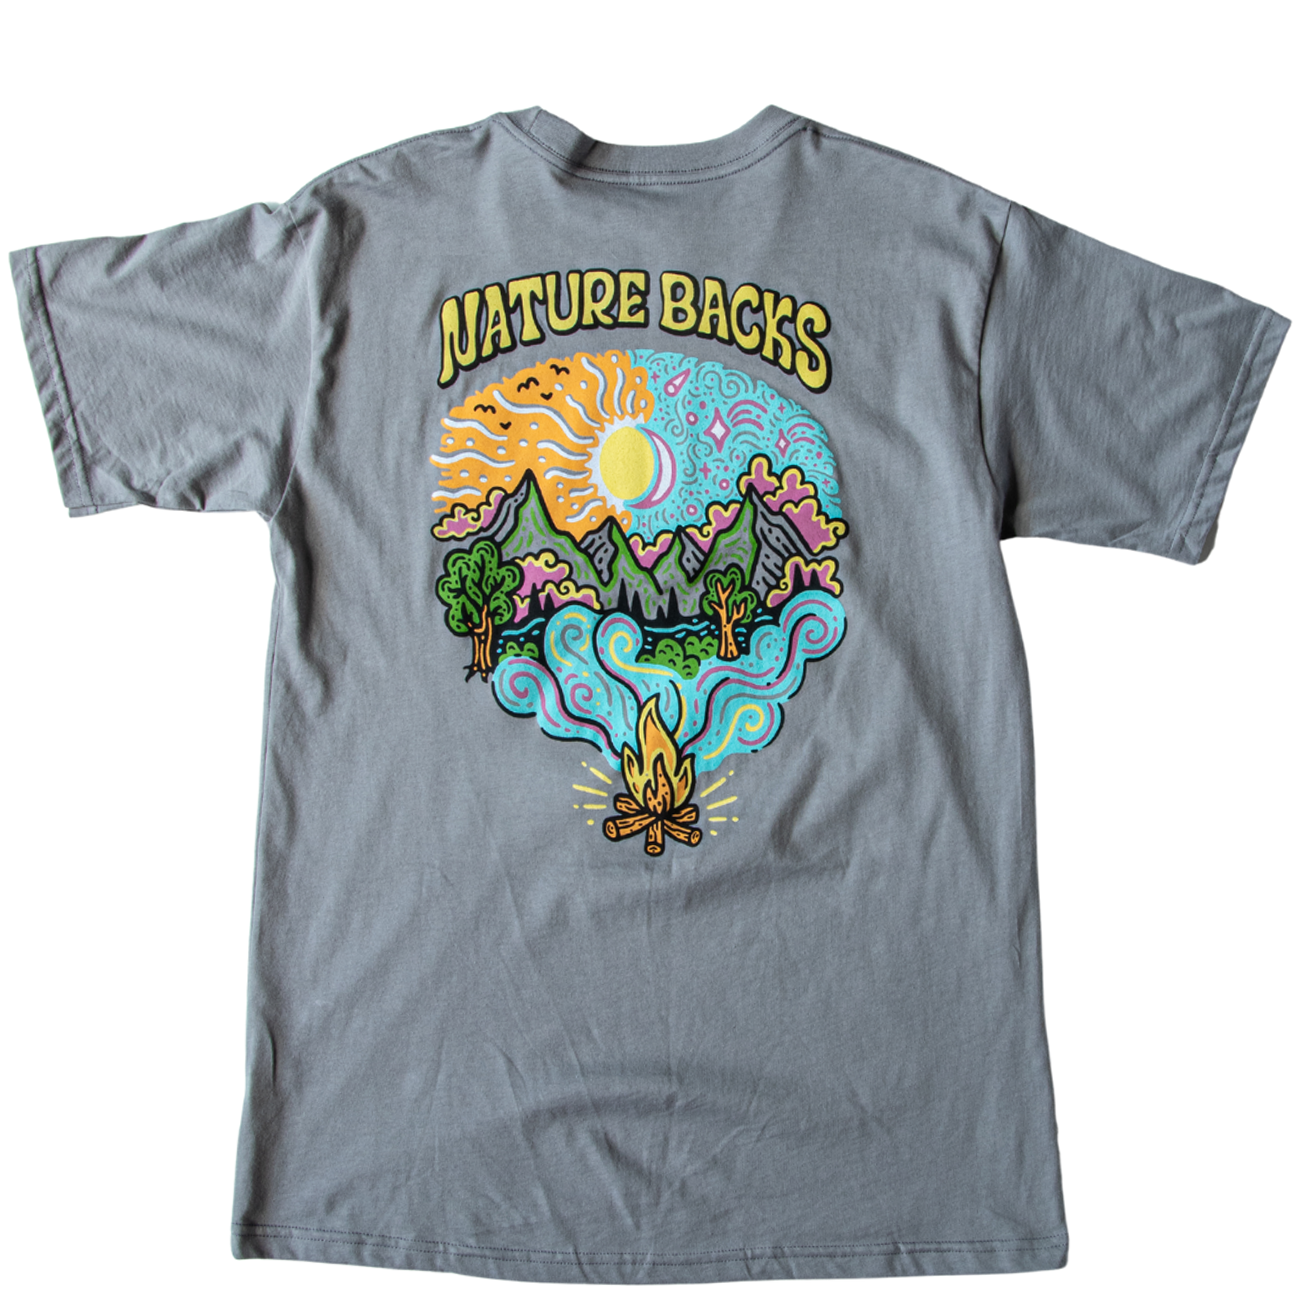 Nature Backs Limited Edition Short Sleeve 100% Organic Cotton T-Shirt | Limited Ember Slate Short Sleeve made with Eco-Friendly Fibers Sustainably made in the USA 